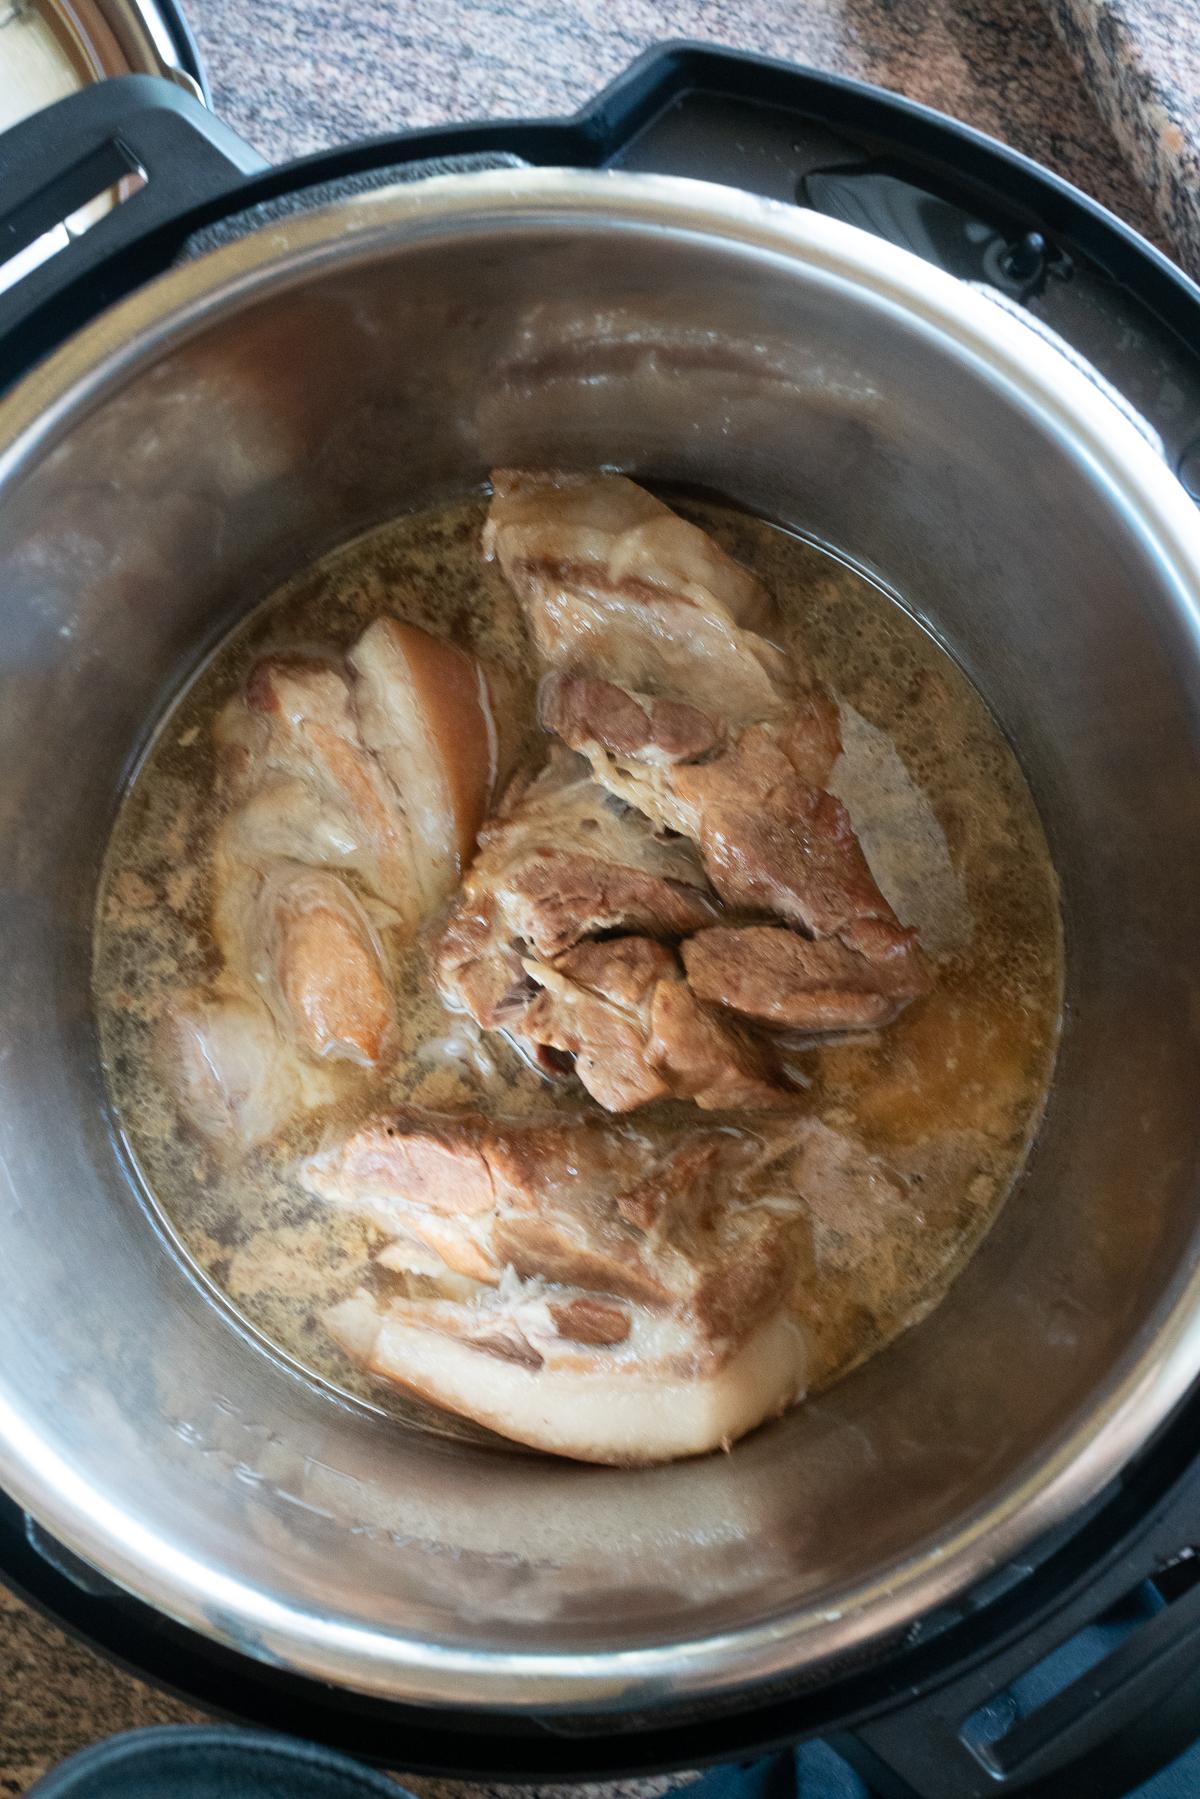 Right after the Kalua Pork is finished cooking in the Instant Pot